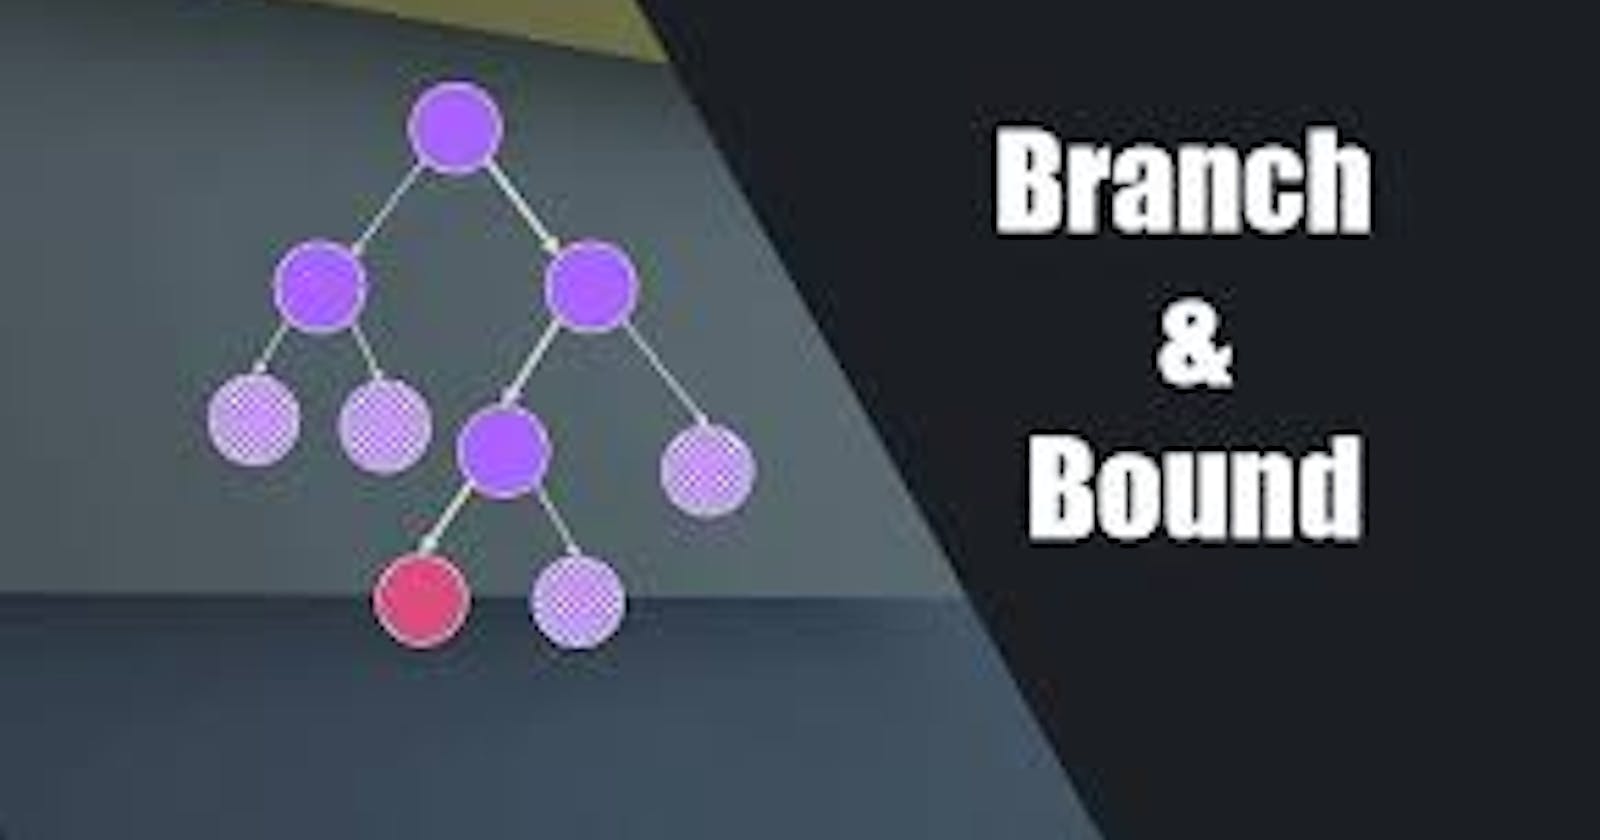 Branch and Bound Algorithm